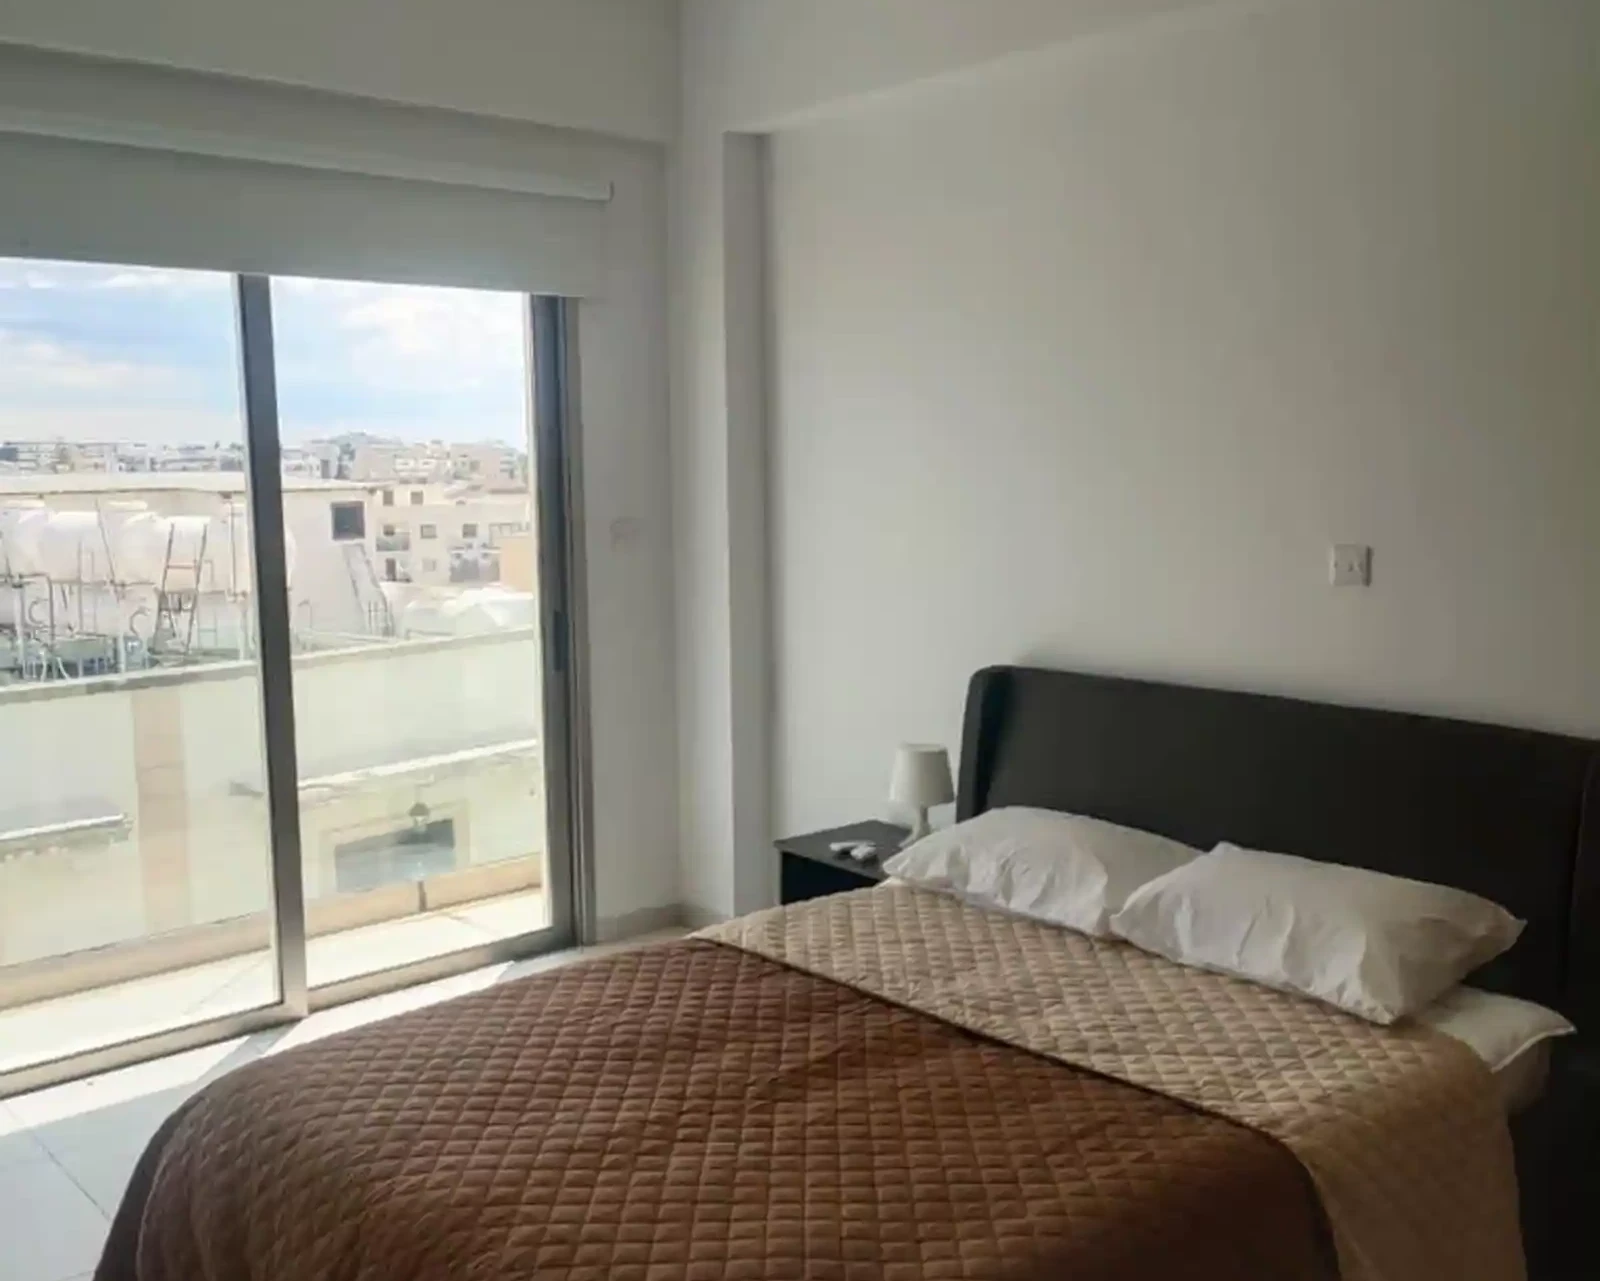 3-bedroom apartment to rent €1.800, image 1